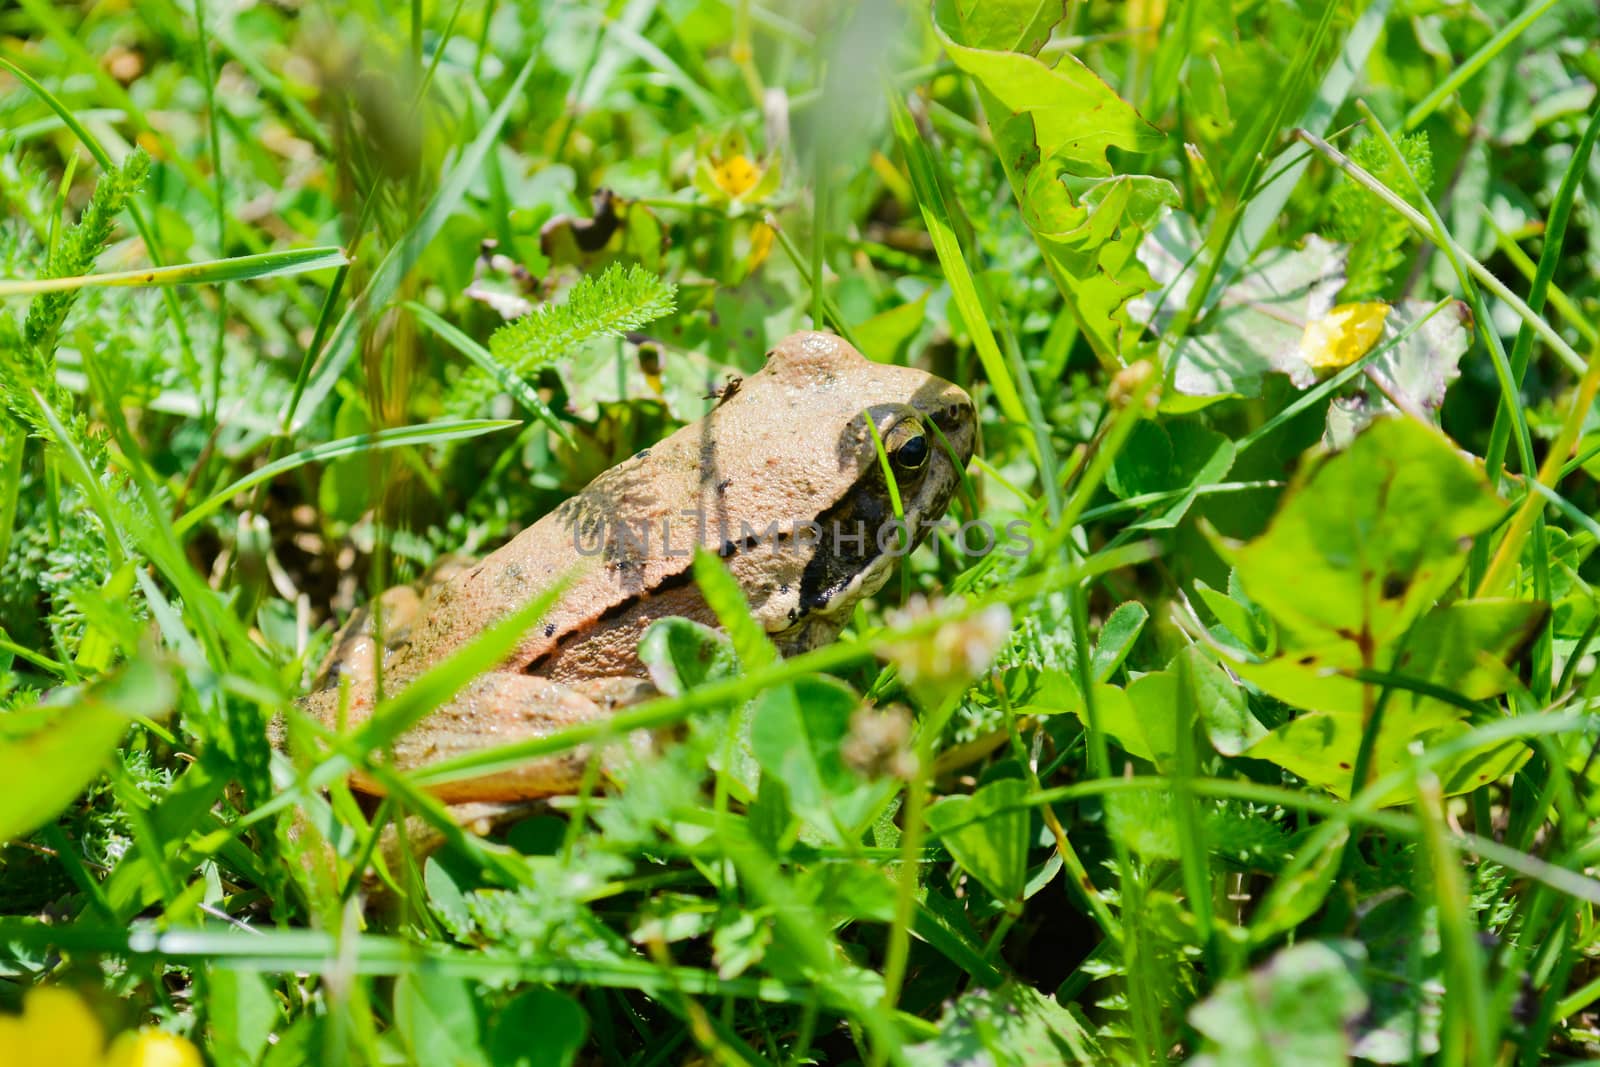 Frog, in search for home, hiding in the grass